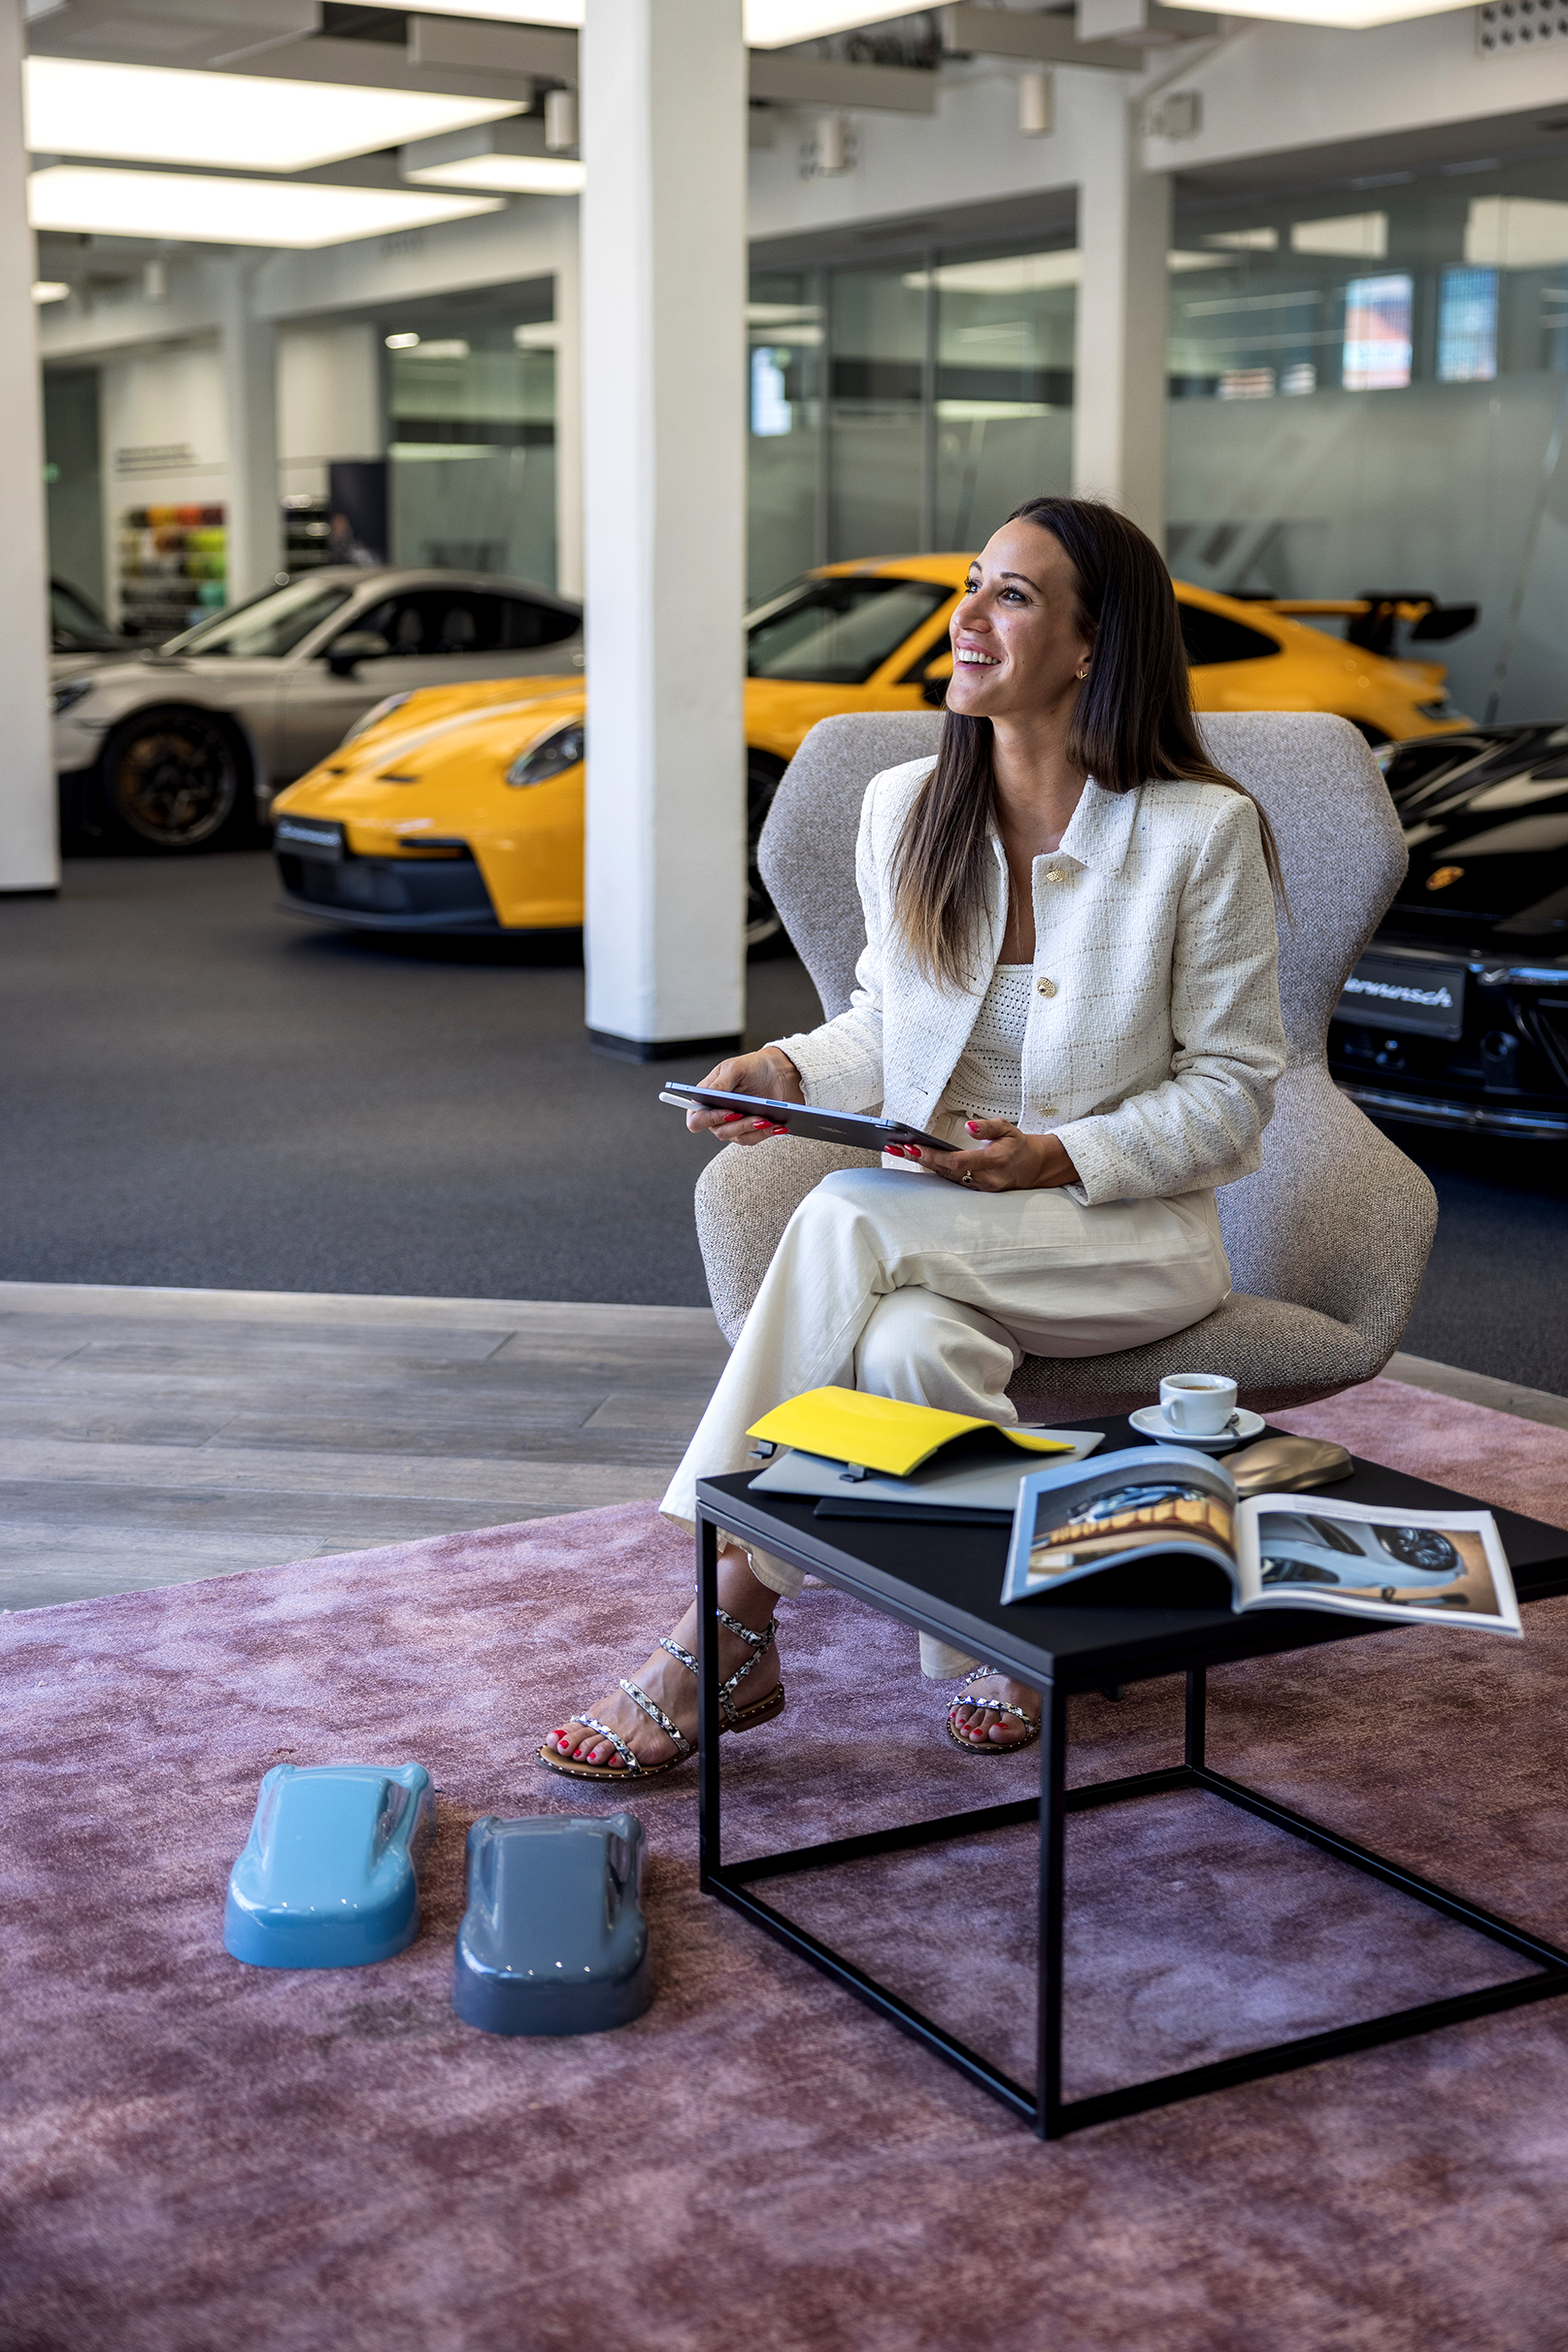 Woman sat in chair with iPad, Porsche cars behind her